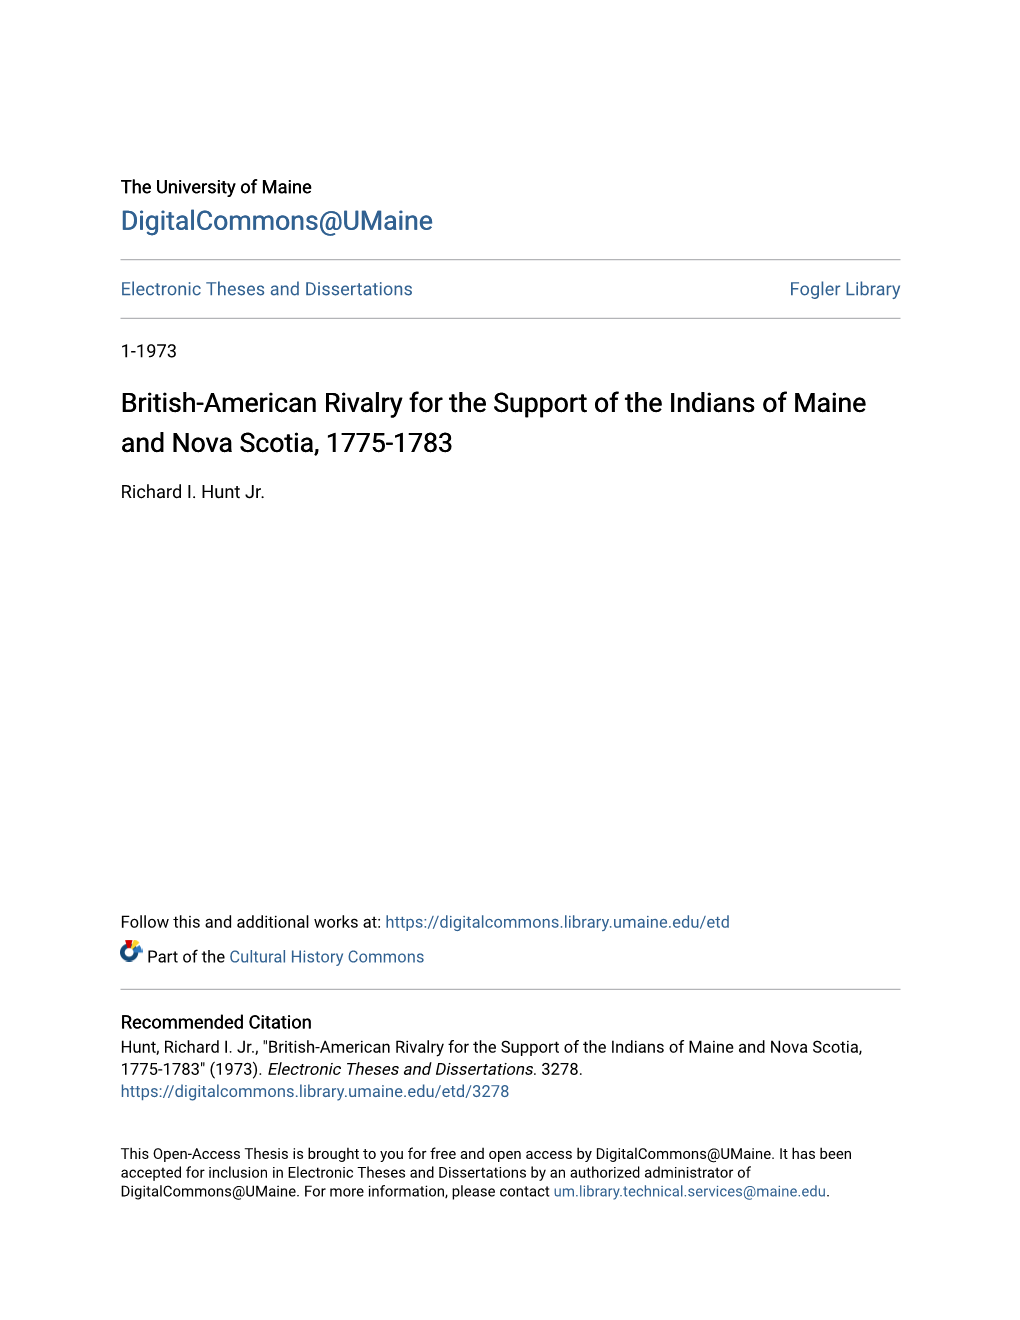 British-American Rivalry for the Support of the Indians of Maine and Nova Scotia, 1775-1783